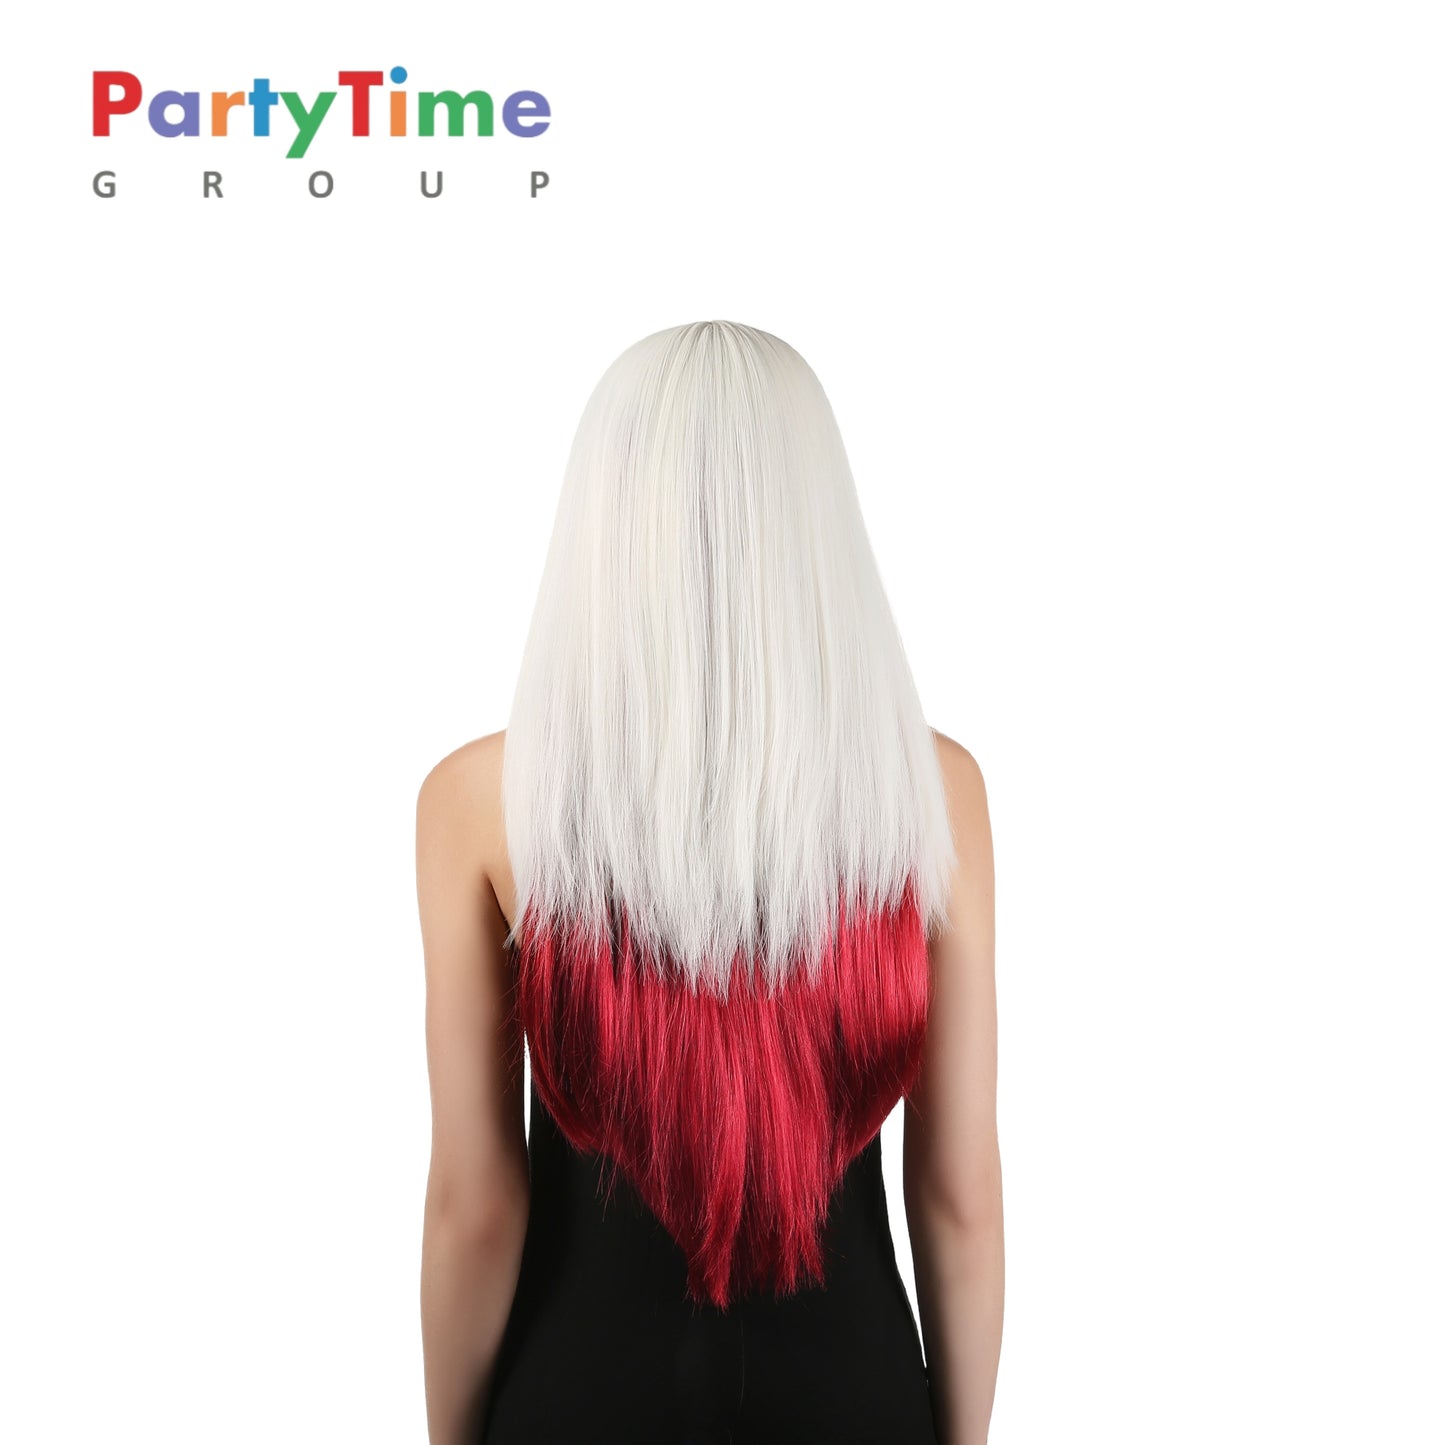 PARTYTIME Purple Plum Inc. Haku - Fade Snow White to Scarlet Red Wig 28'' Long Straight Layered